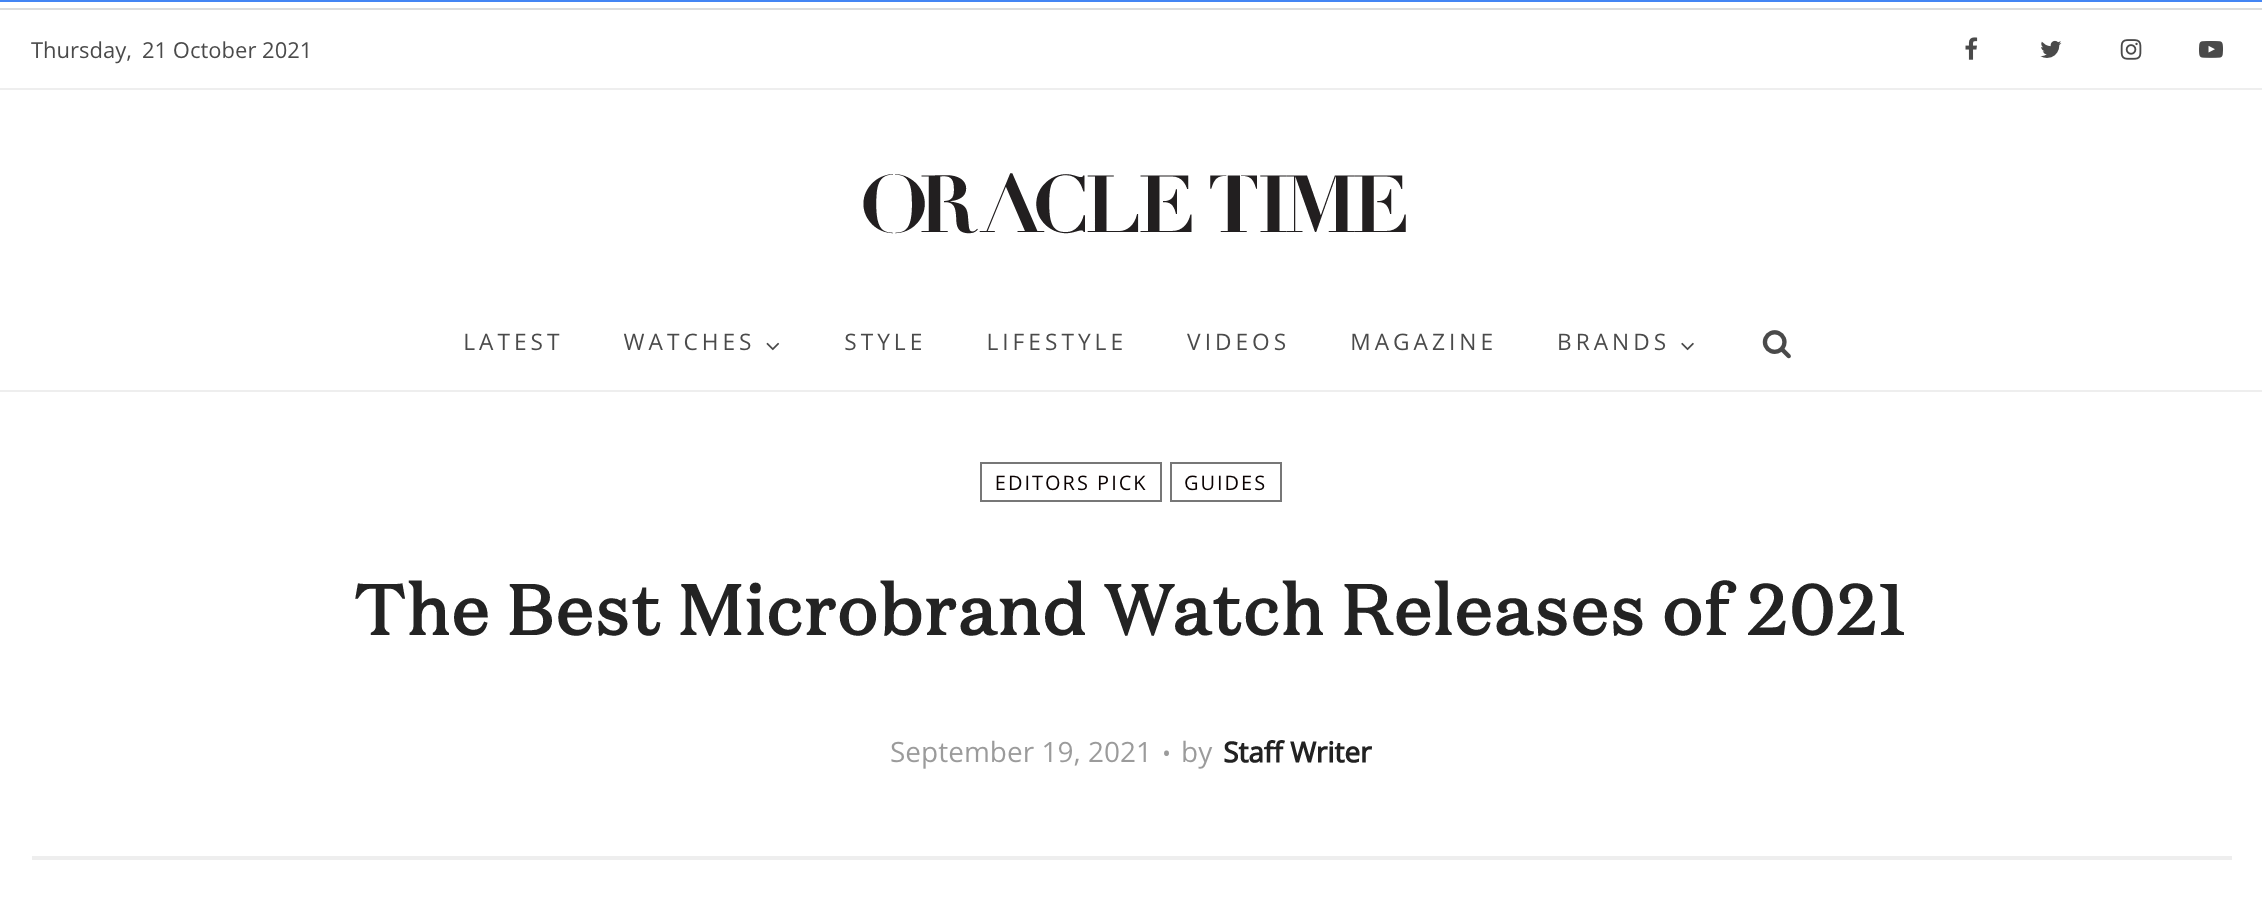 Oracle Time - The Best Microbrand Watch Releases of 2021